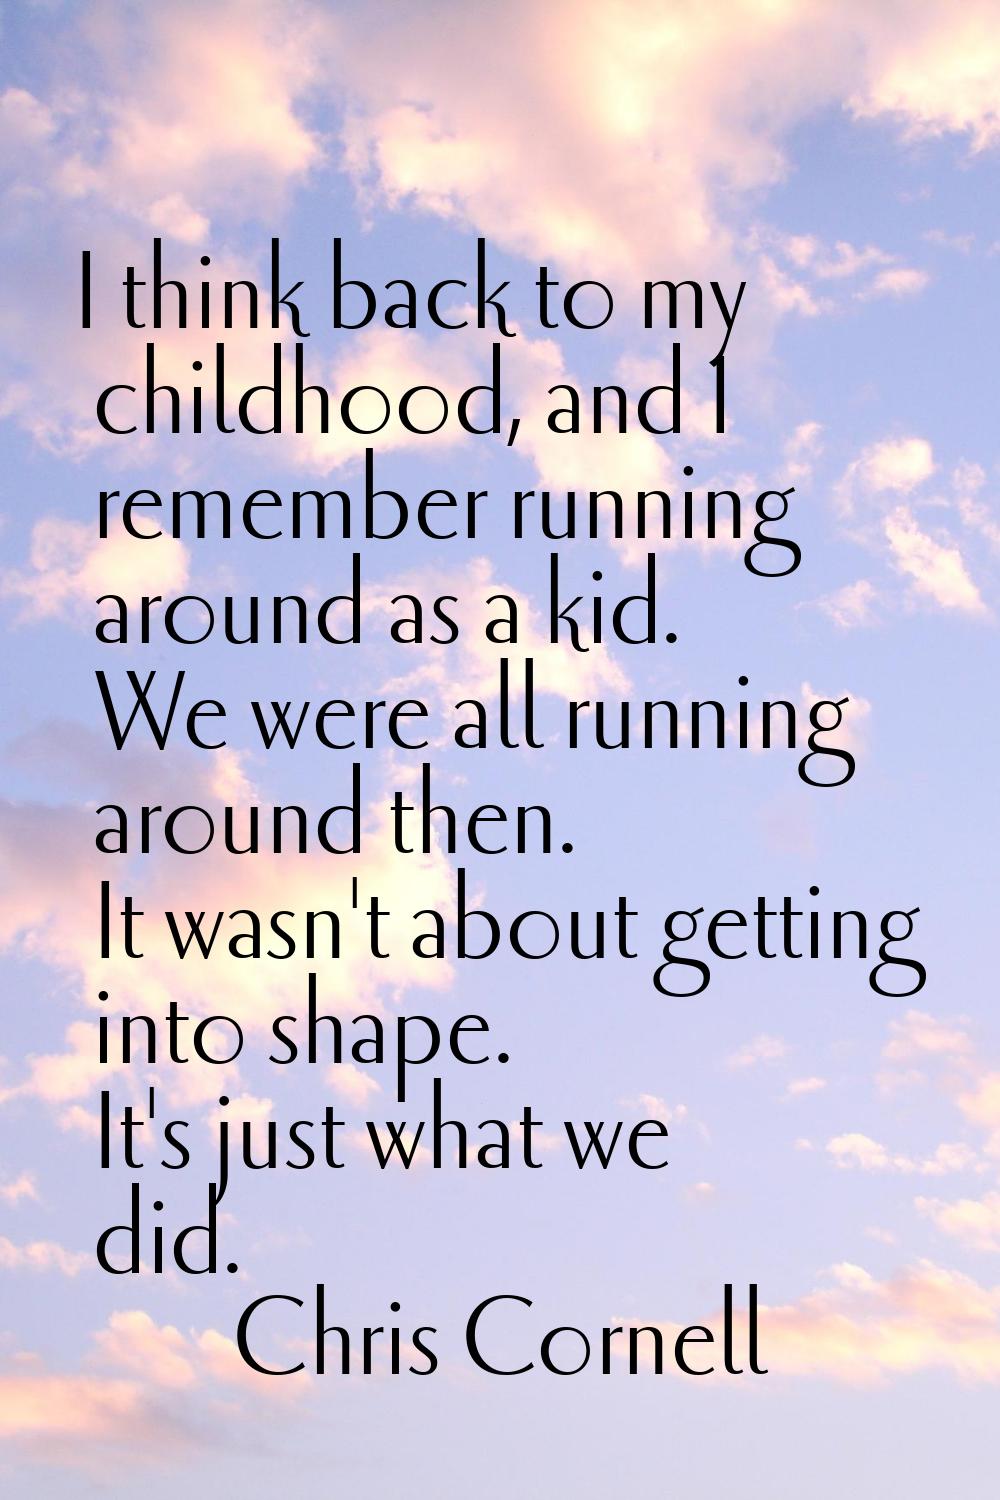 I think back to my childhood, and I remember running around as a kid. We were all running around th